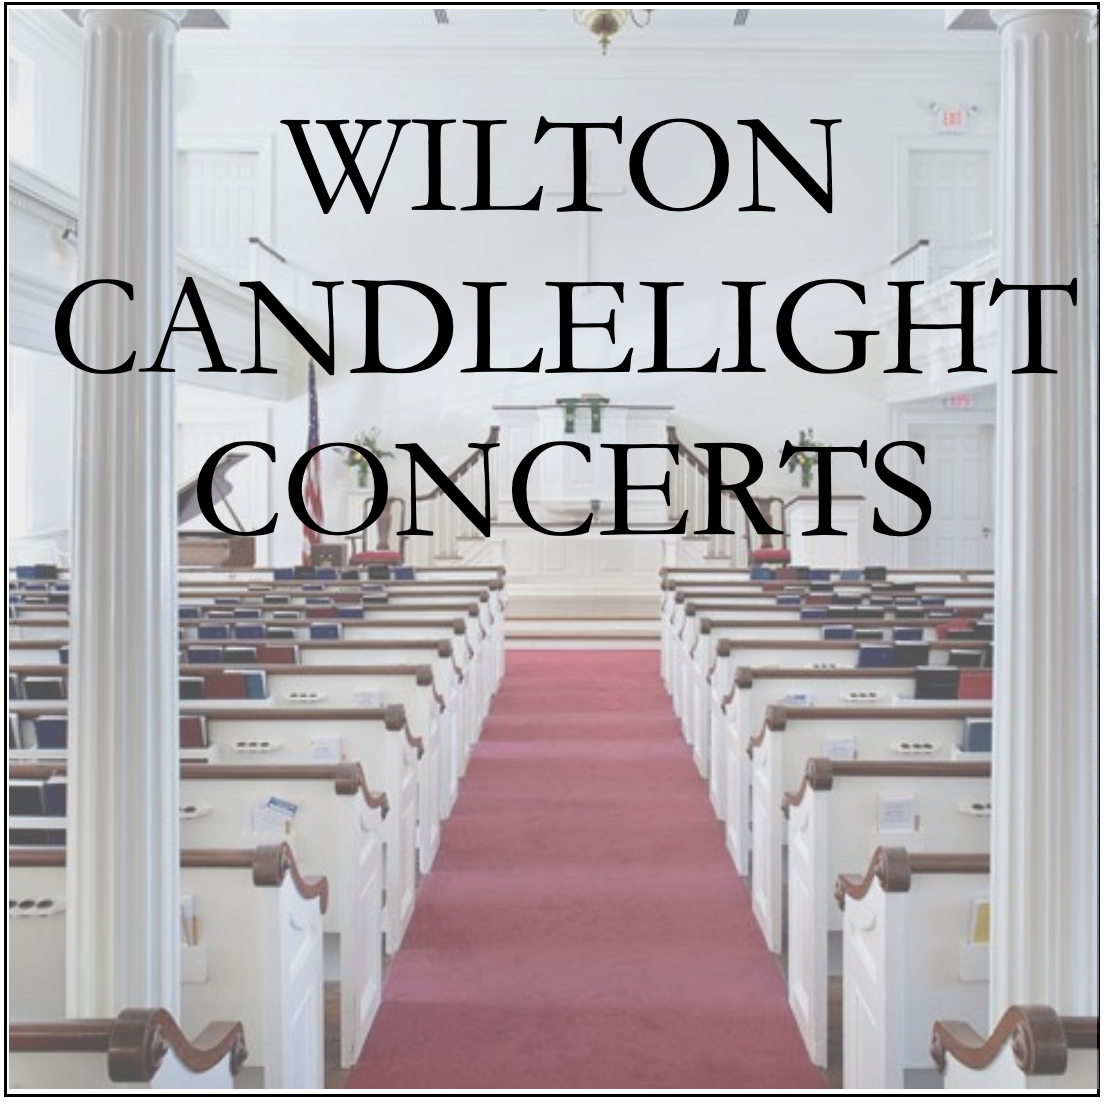 Wilton Candlelight Concerts